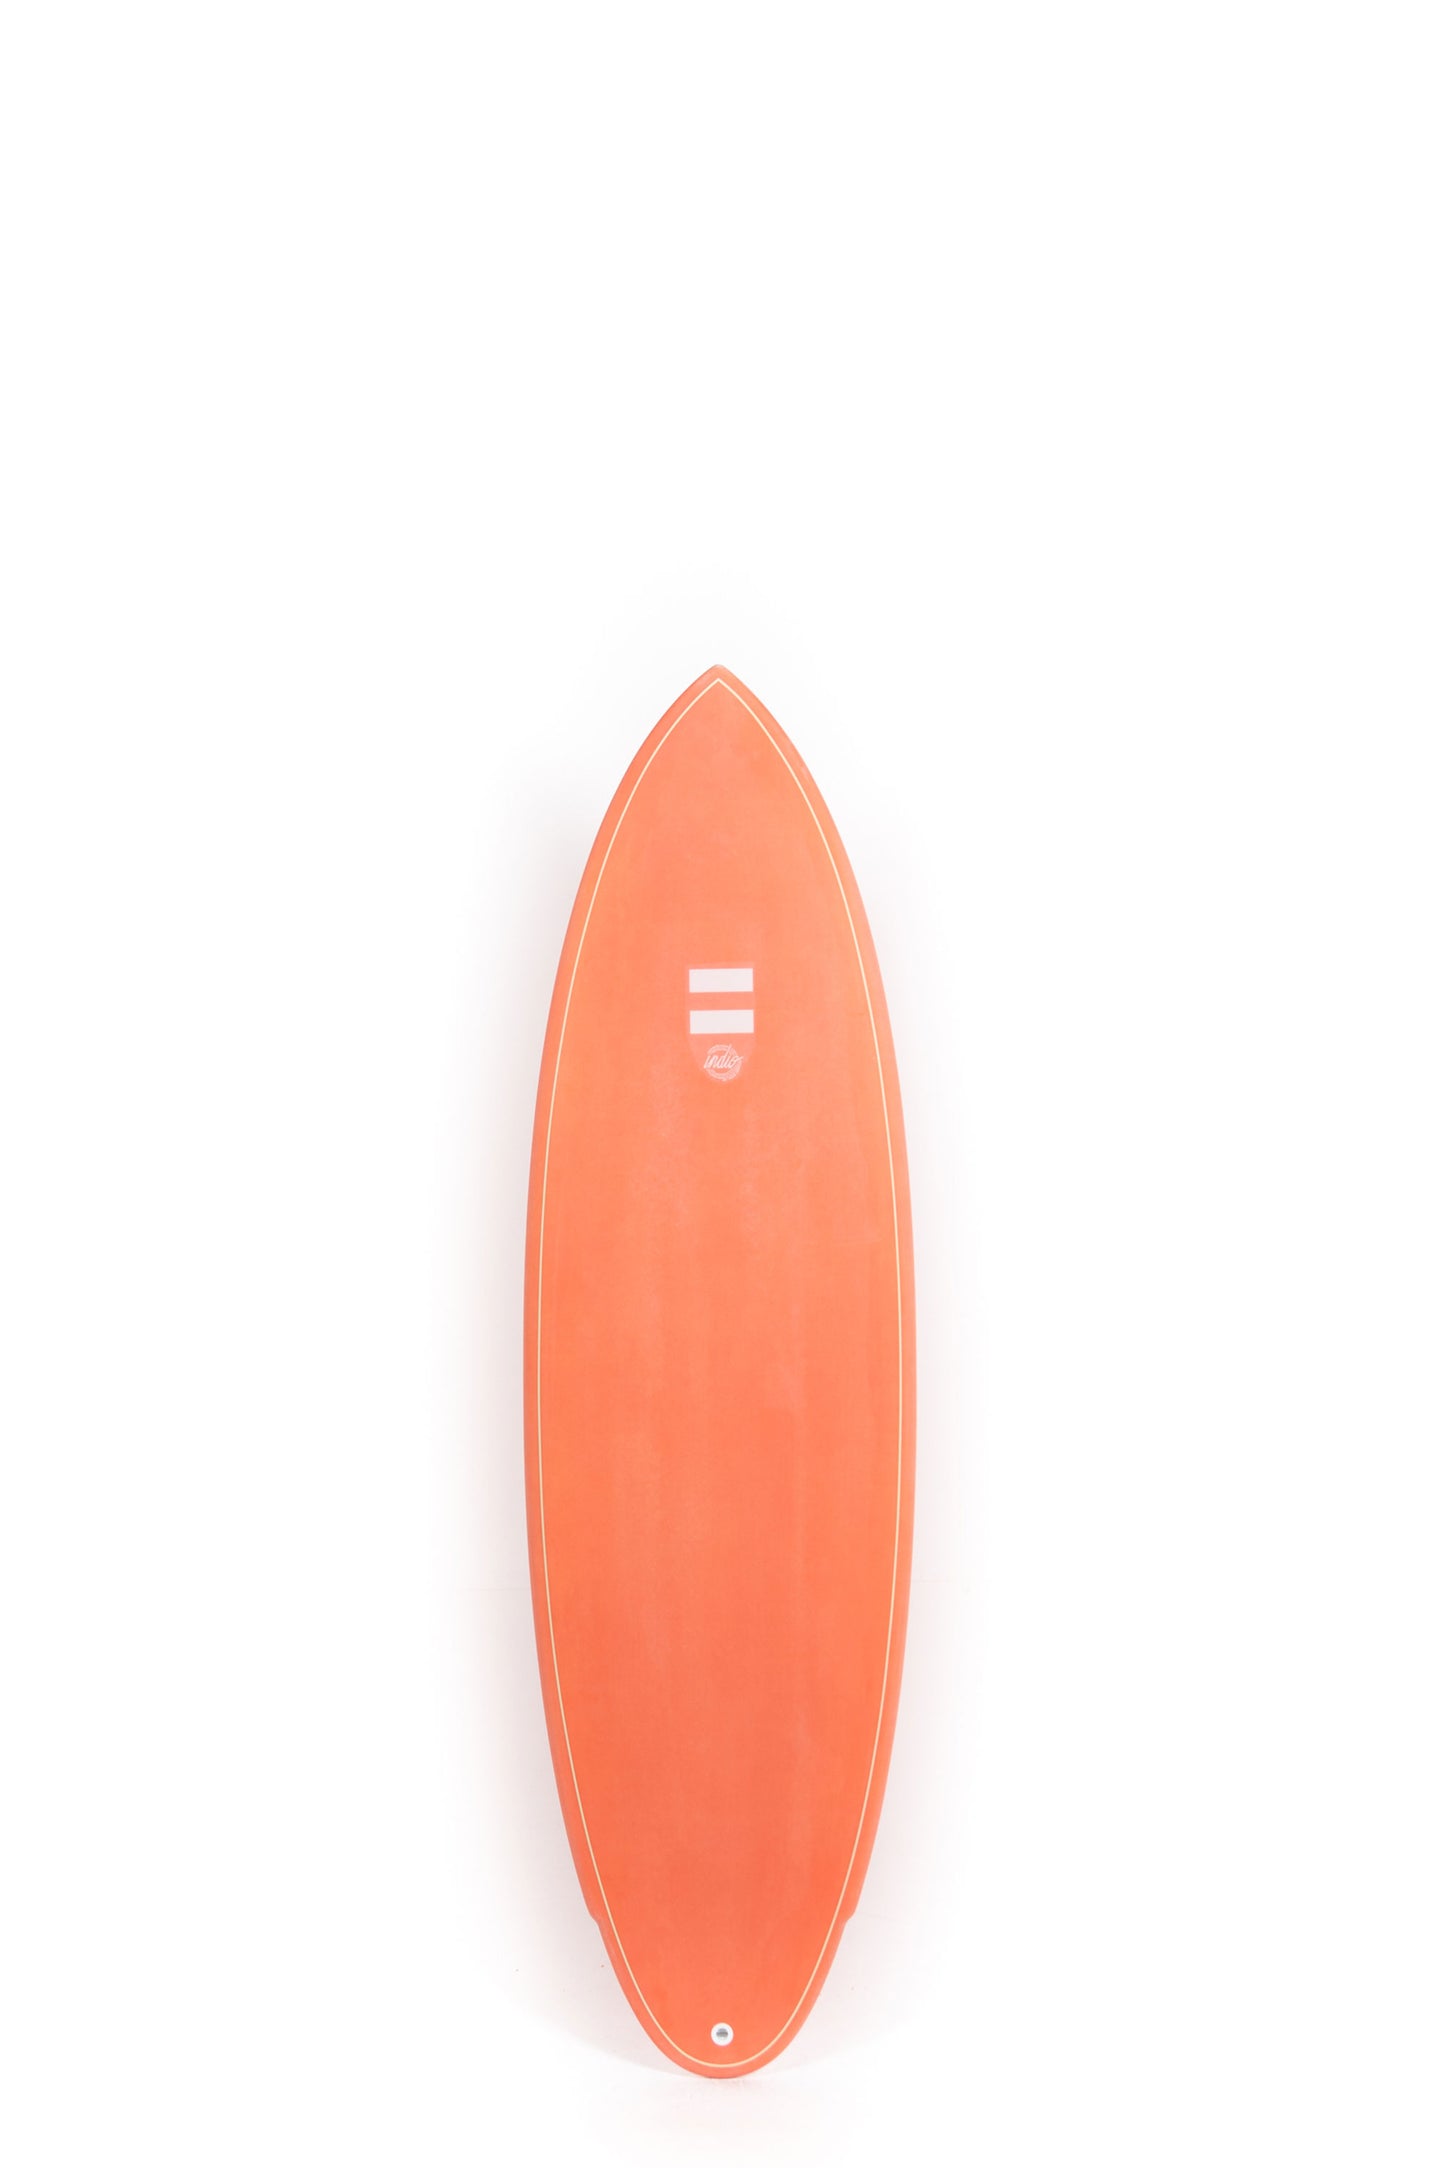 Pukas Surf Shop Indio Surfboards Rancho Red Fall 6'2"